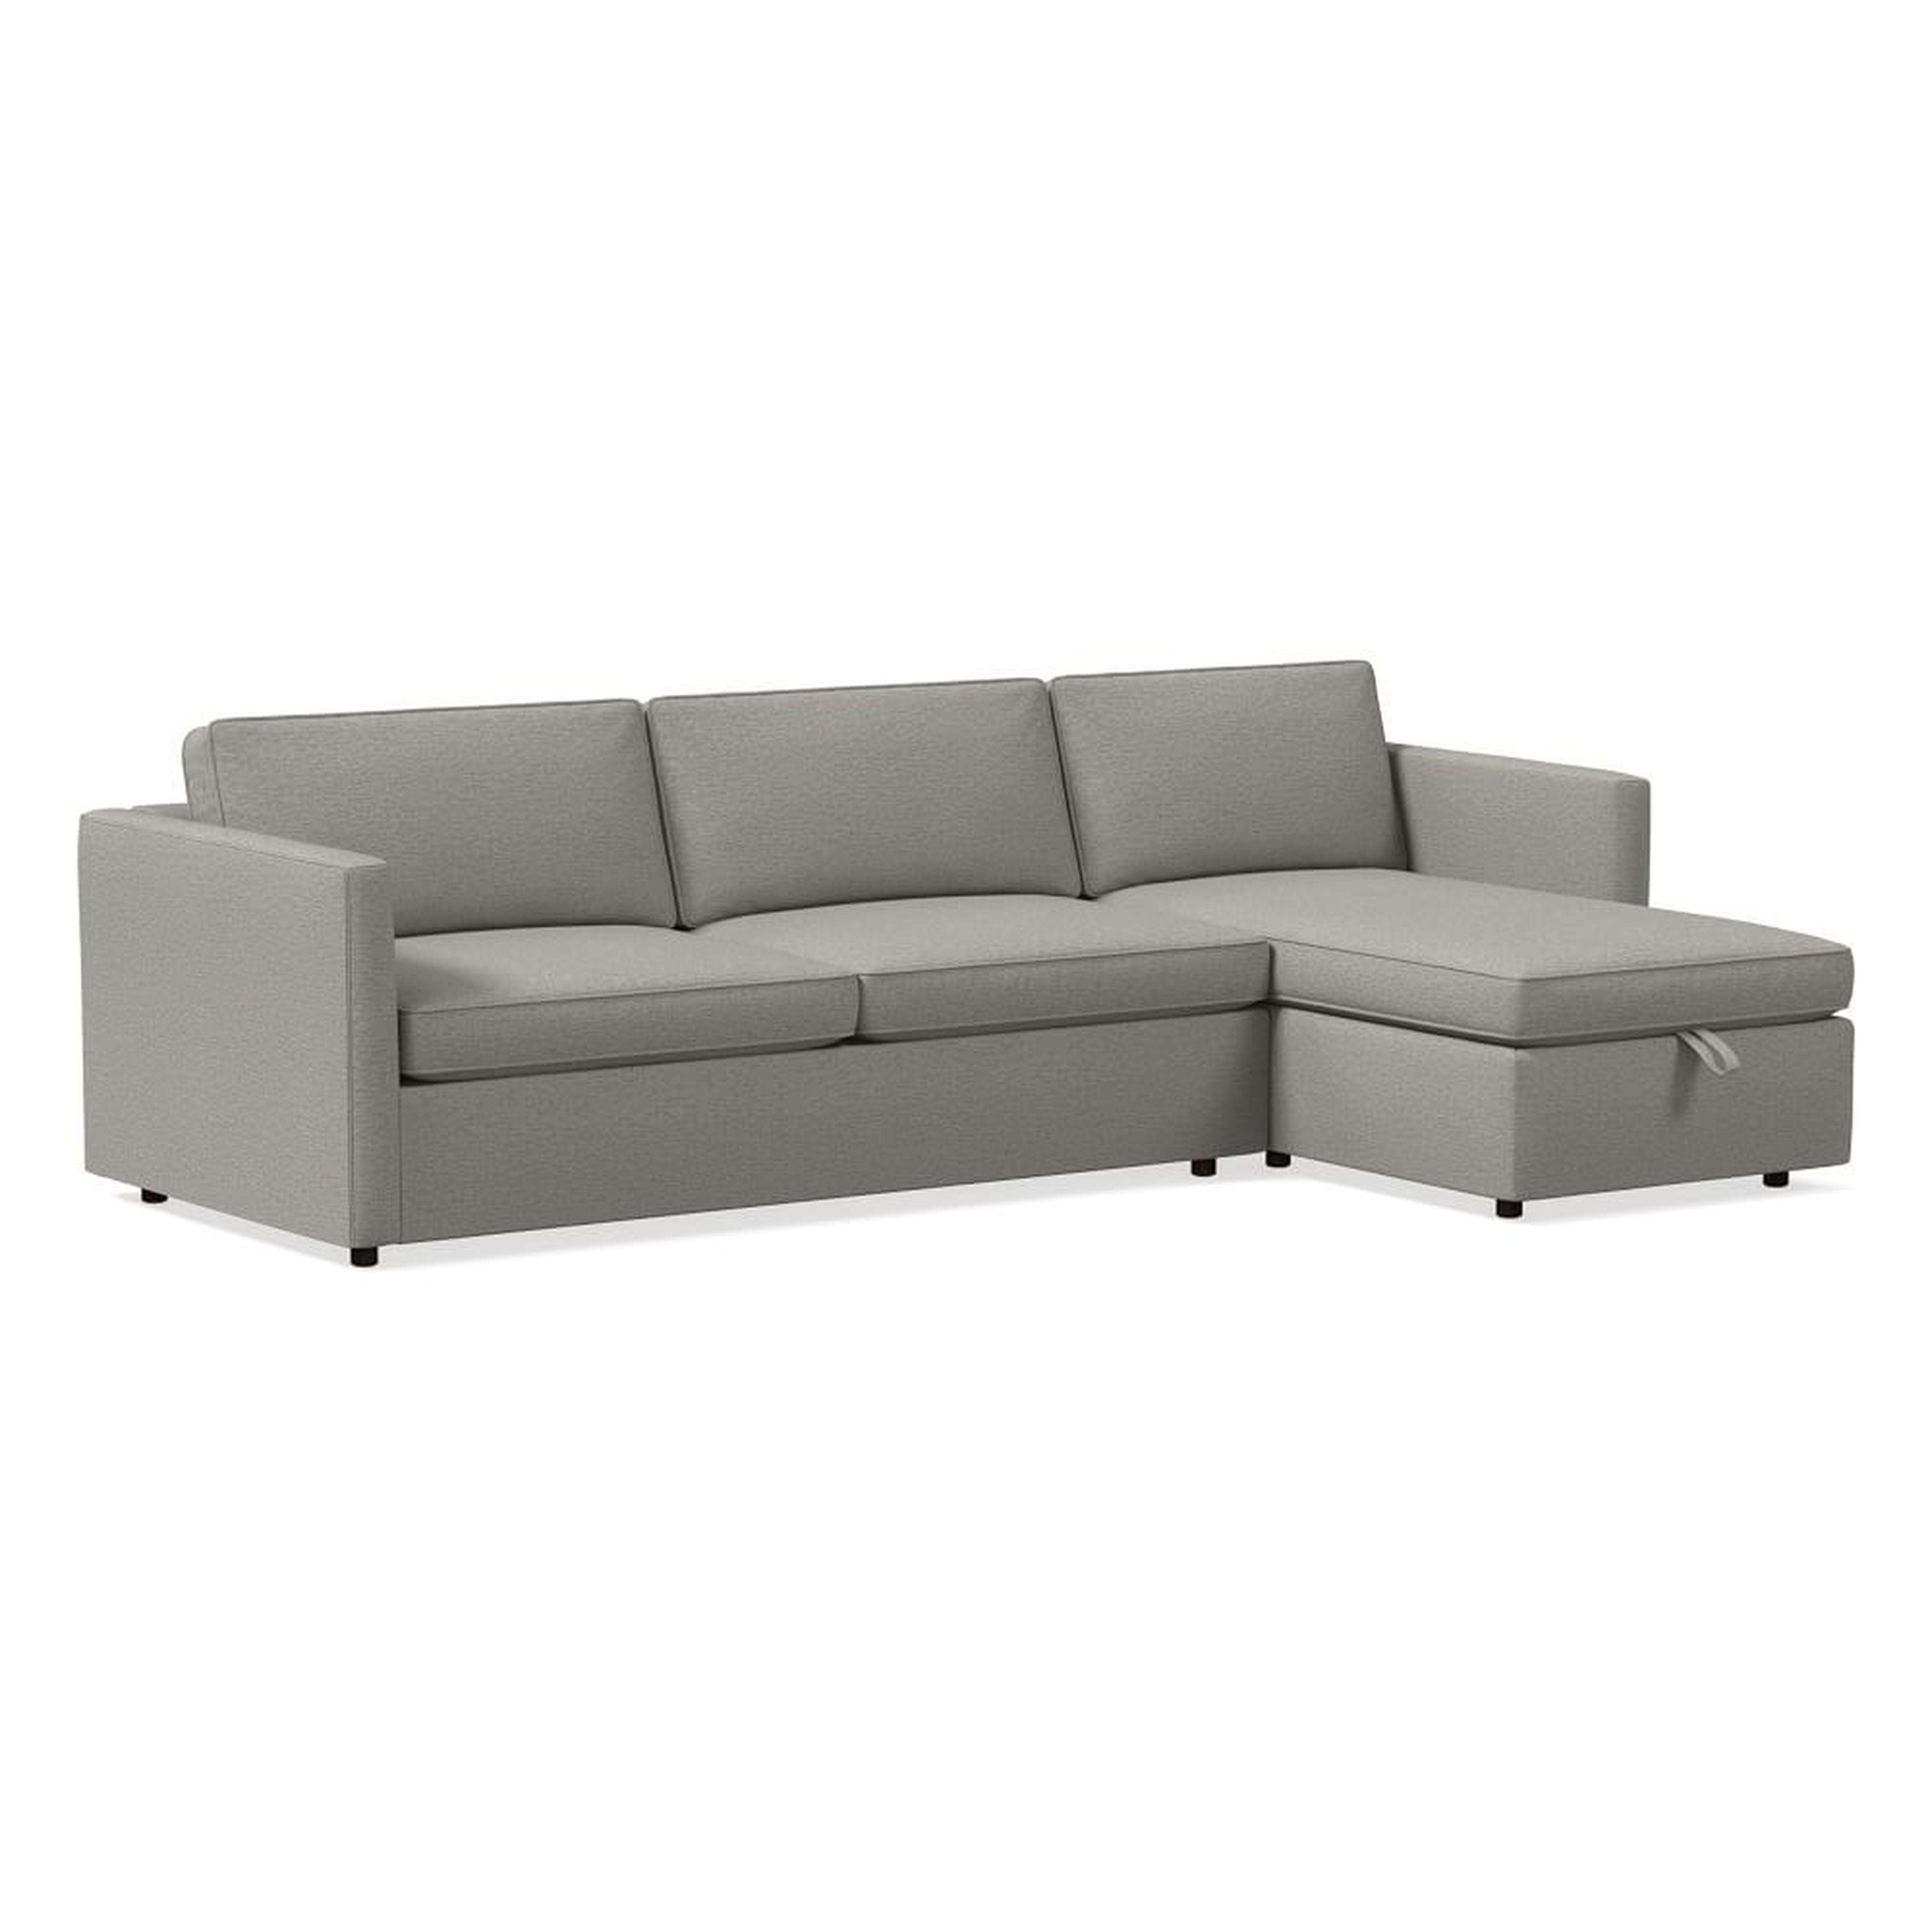 Harris Sectional Set 03: LA Sleeper Sofa, RA Storage Chaise, Poly , Twill, Silver, Concealed Supports - West Elm